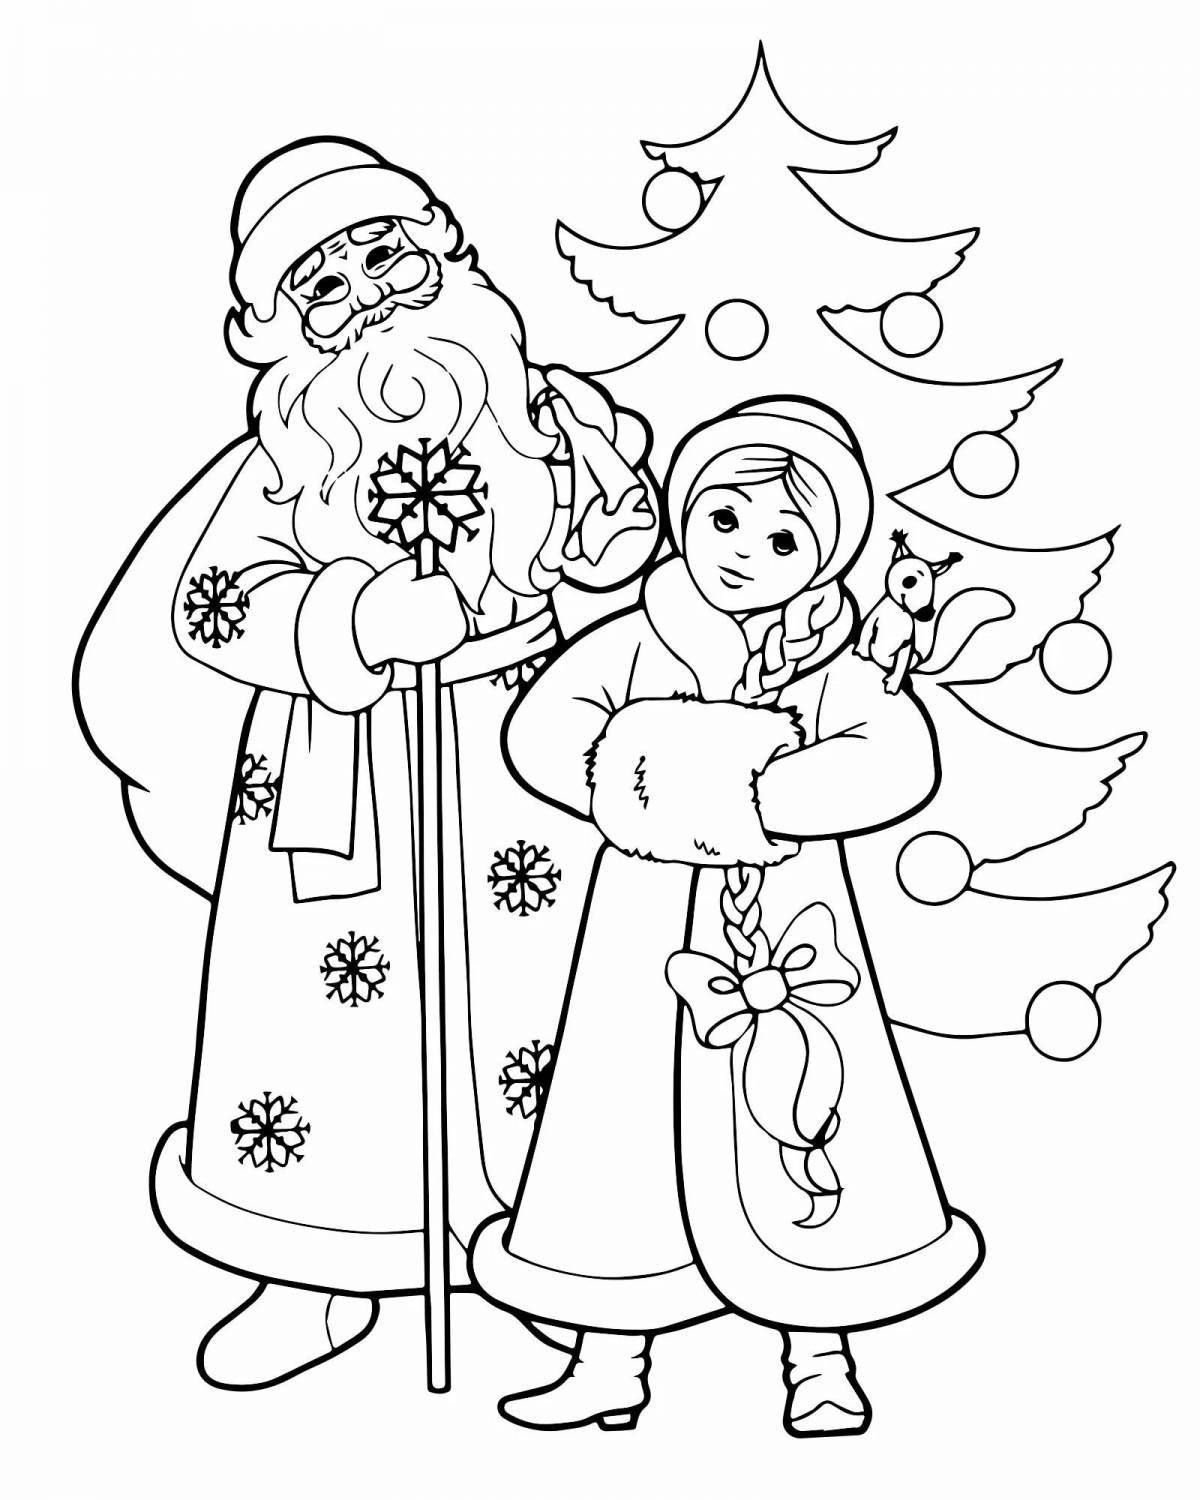 Coloring book glamorous Santa Claus and Snow Maiden Christmas